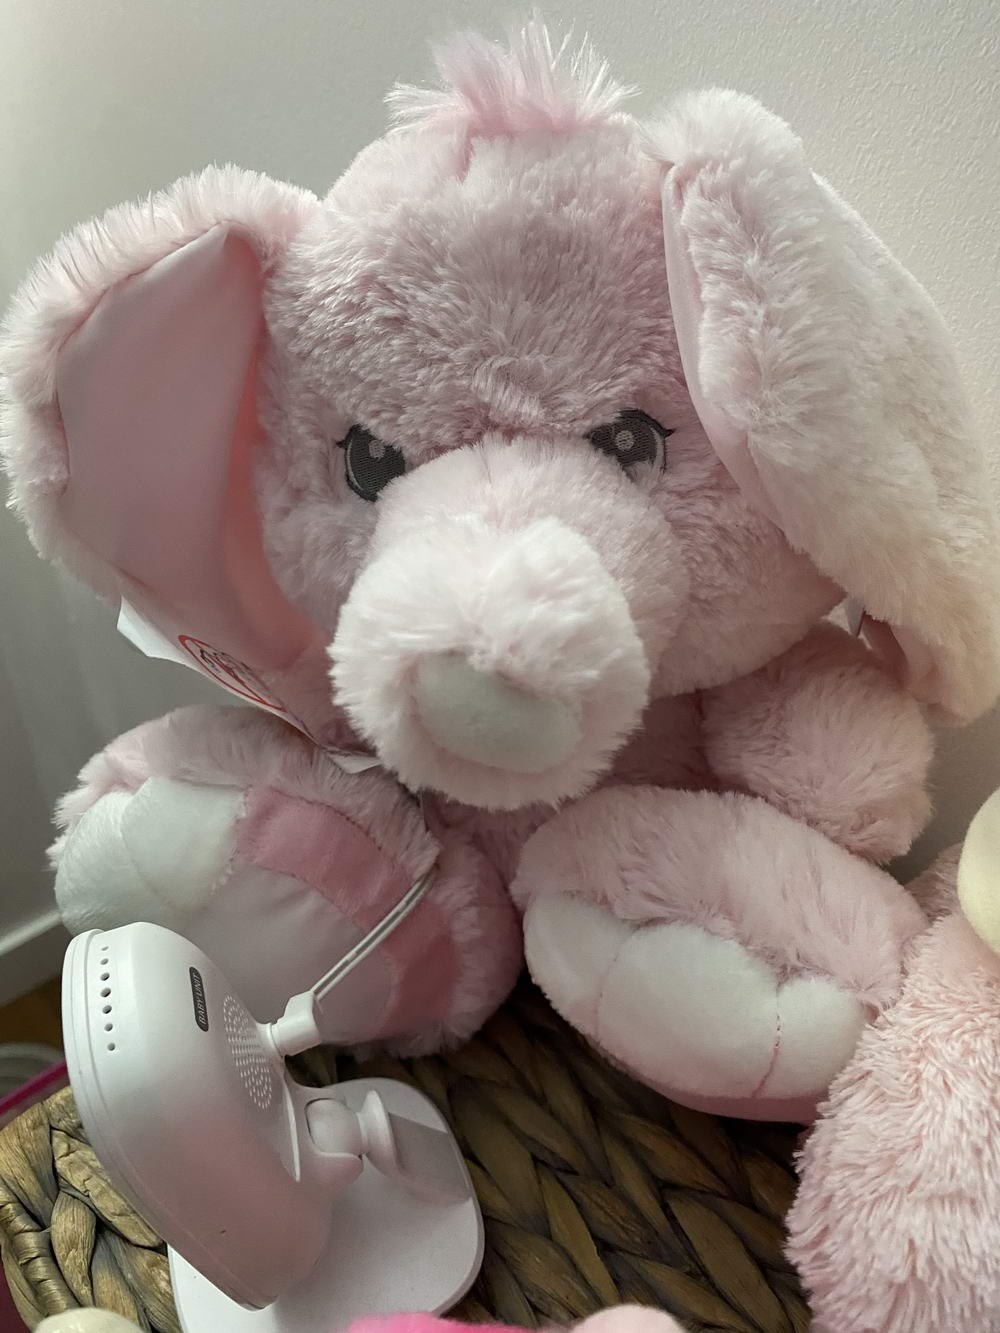 wtf images - angry looking pink stuffed animal